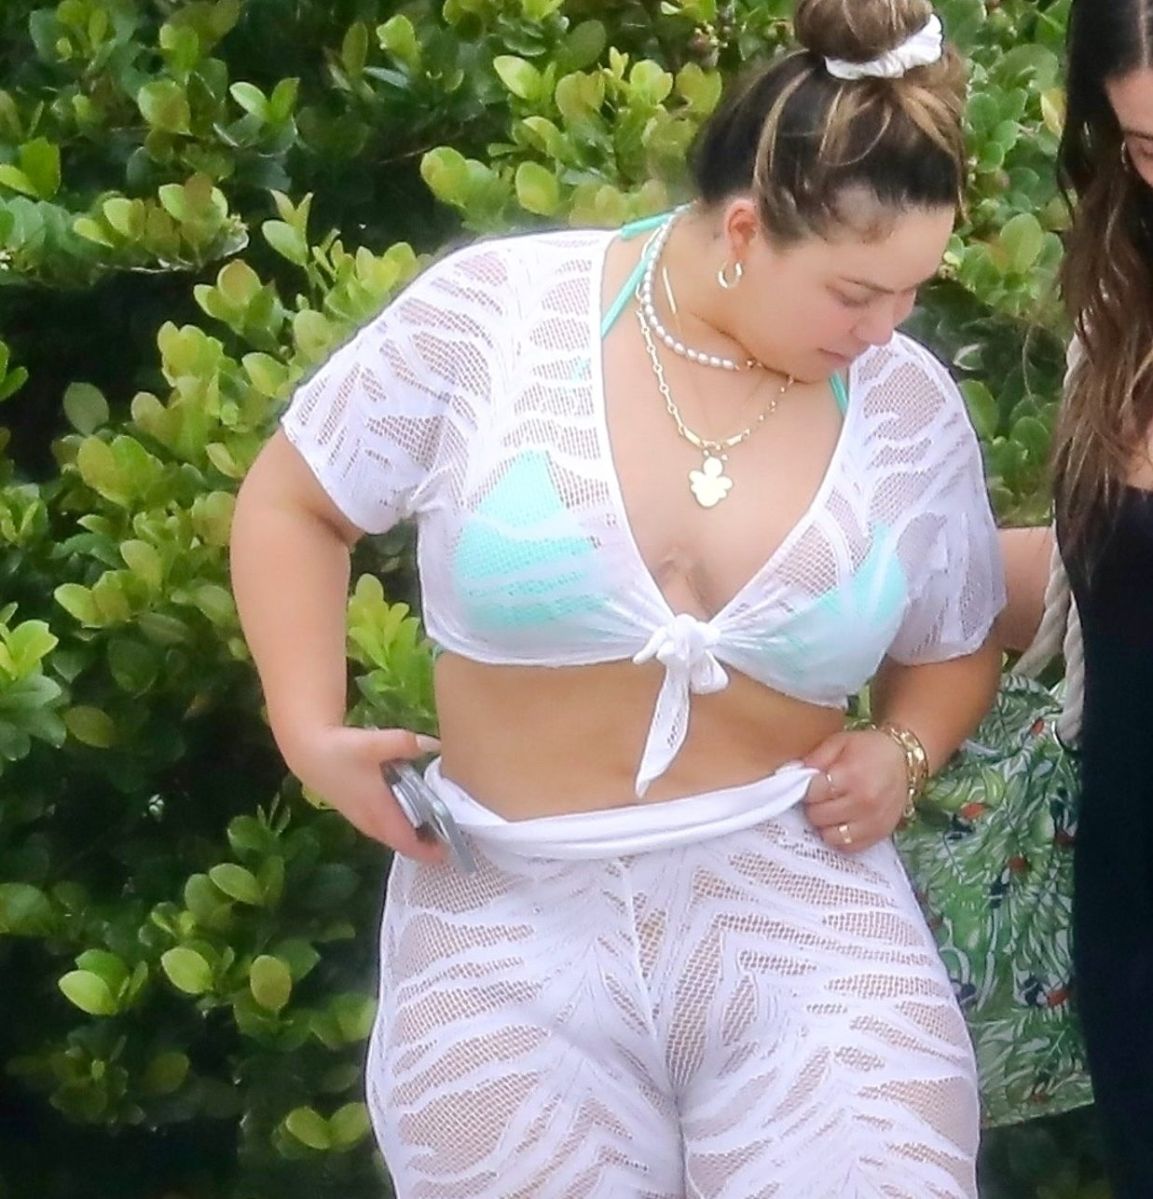 Chiquis Rivera’s jumpsuit made her tail transparent and revealed her thong